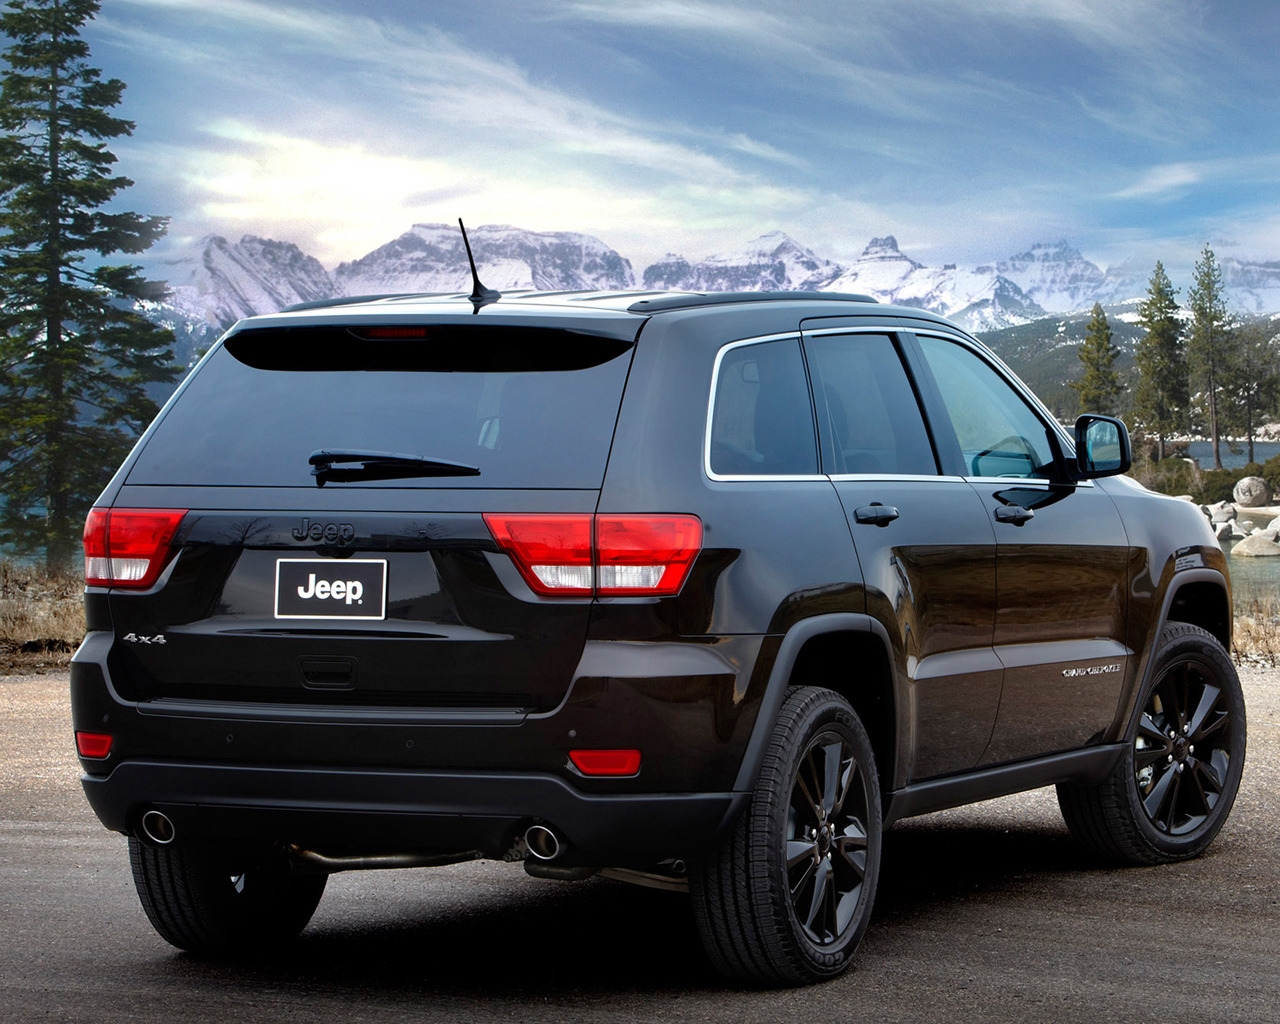 Jeep Grand Cherokee Concept for 1280 x 1024 resolution